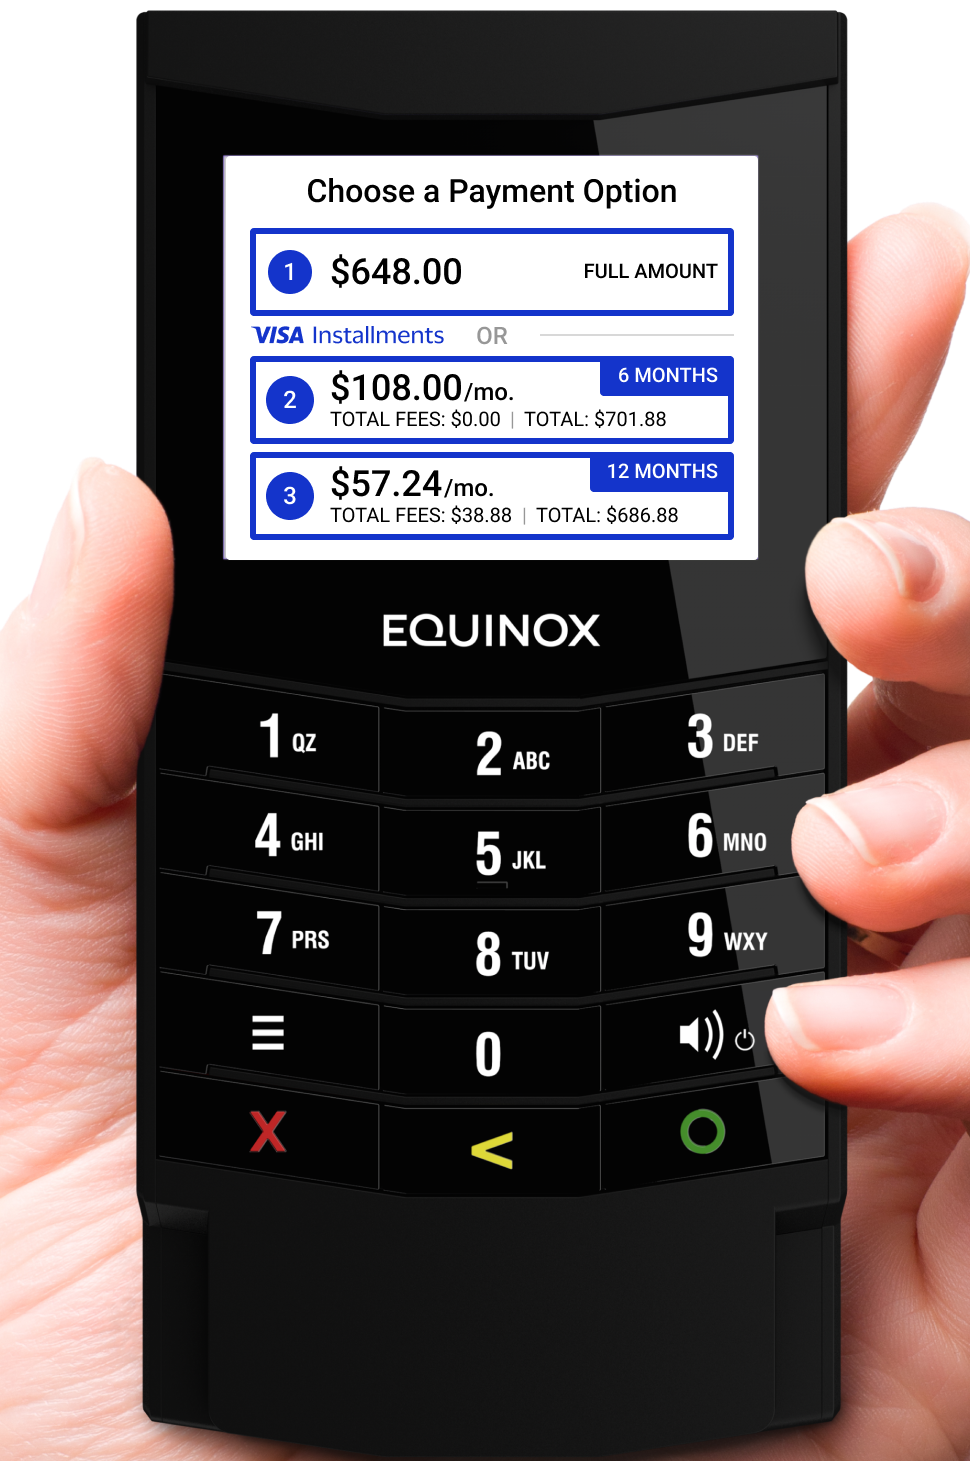 Equinox device displaying the Visa Installments POS interface for installment plan selection